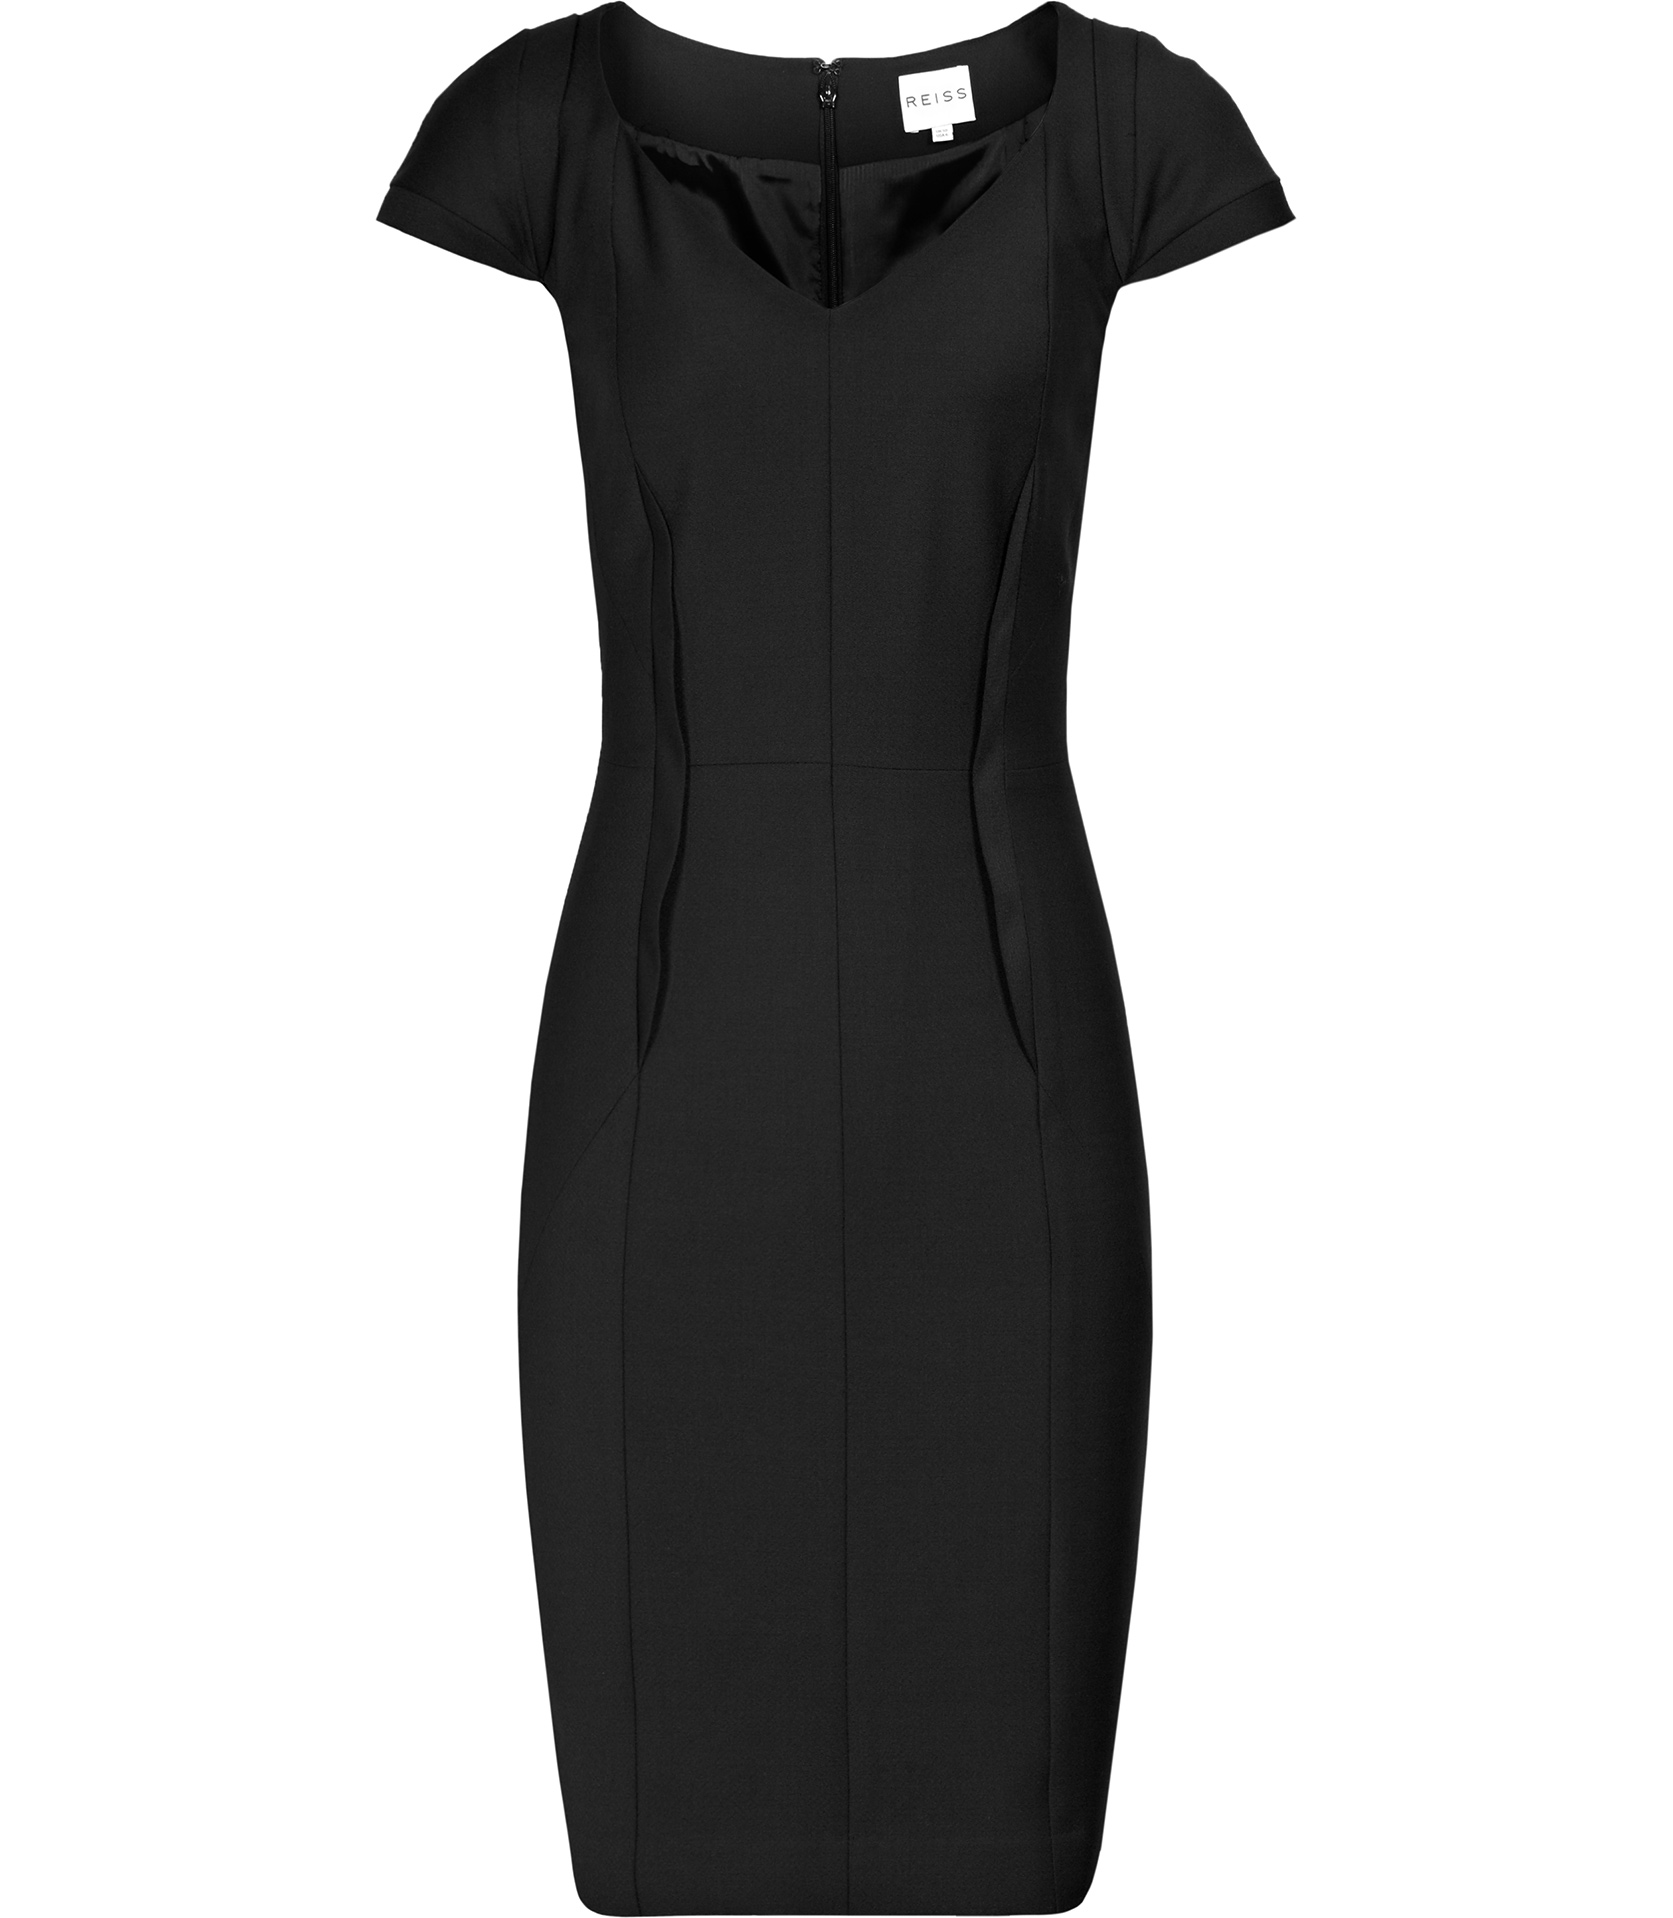 Lyst - Reiss Claire Mar Dart Detail Fitted Dress in Black